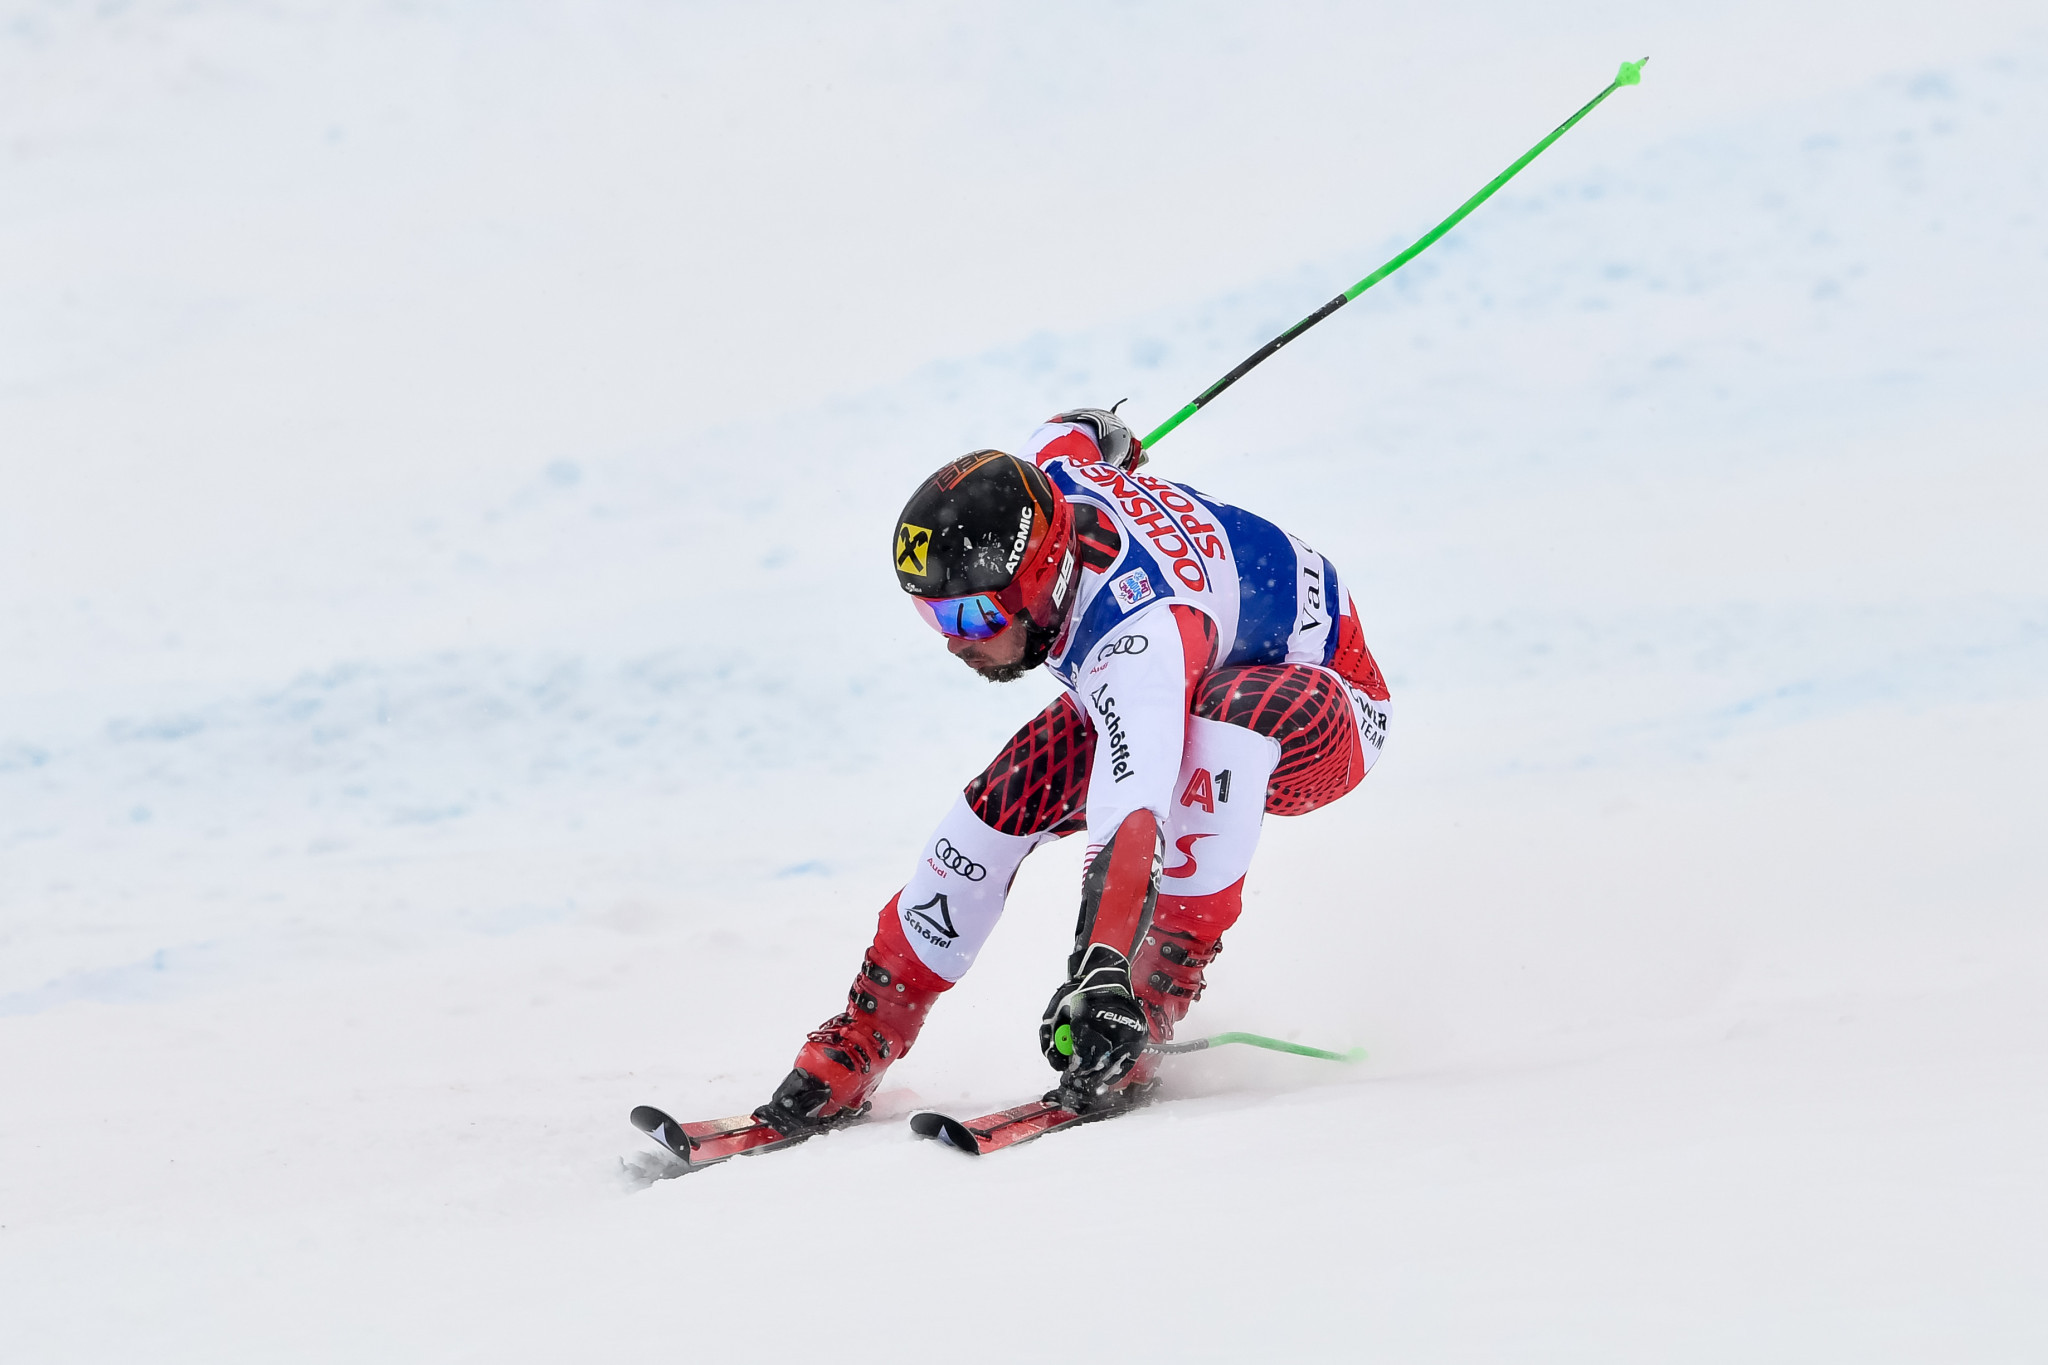 Marcel Hirscher recorded a 60th victory on the World Cup circuit ©Getty Images